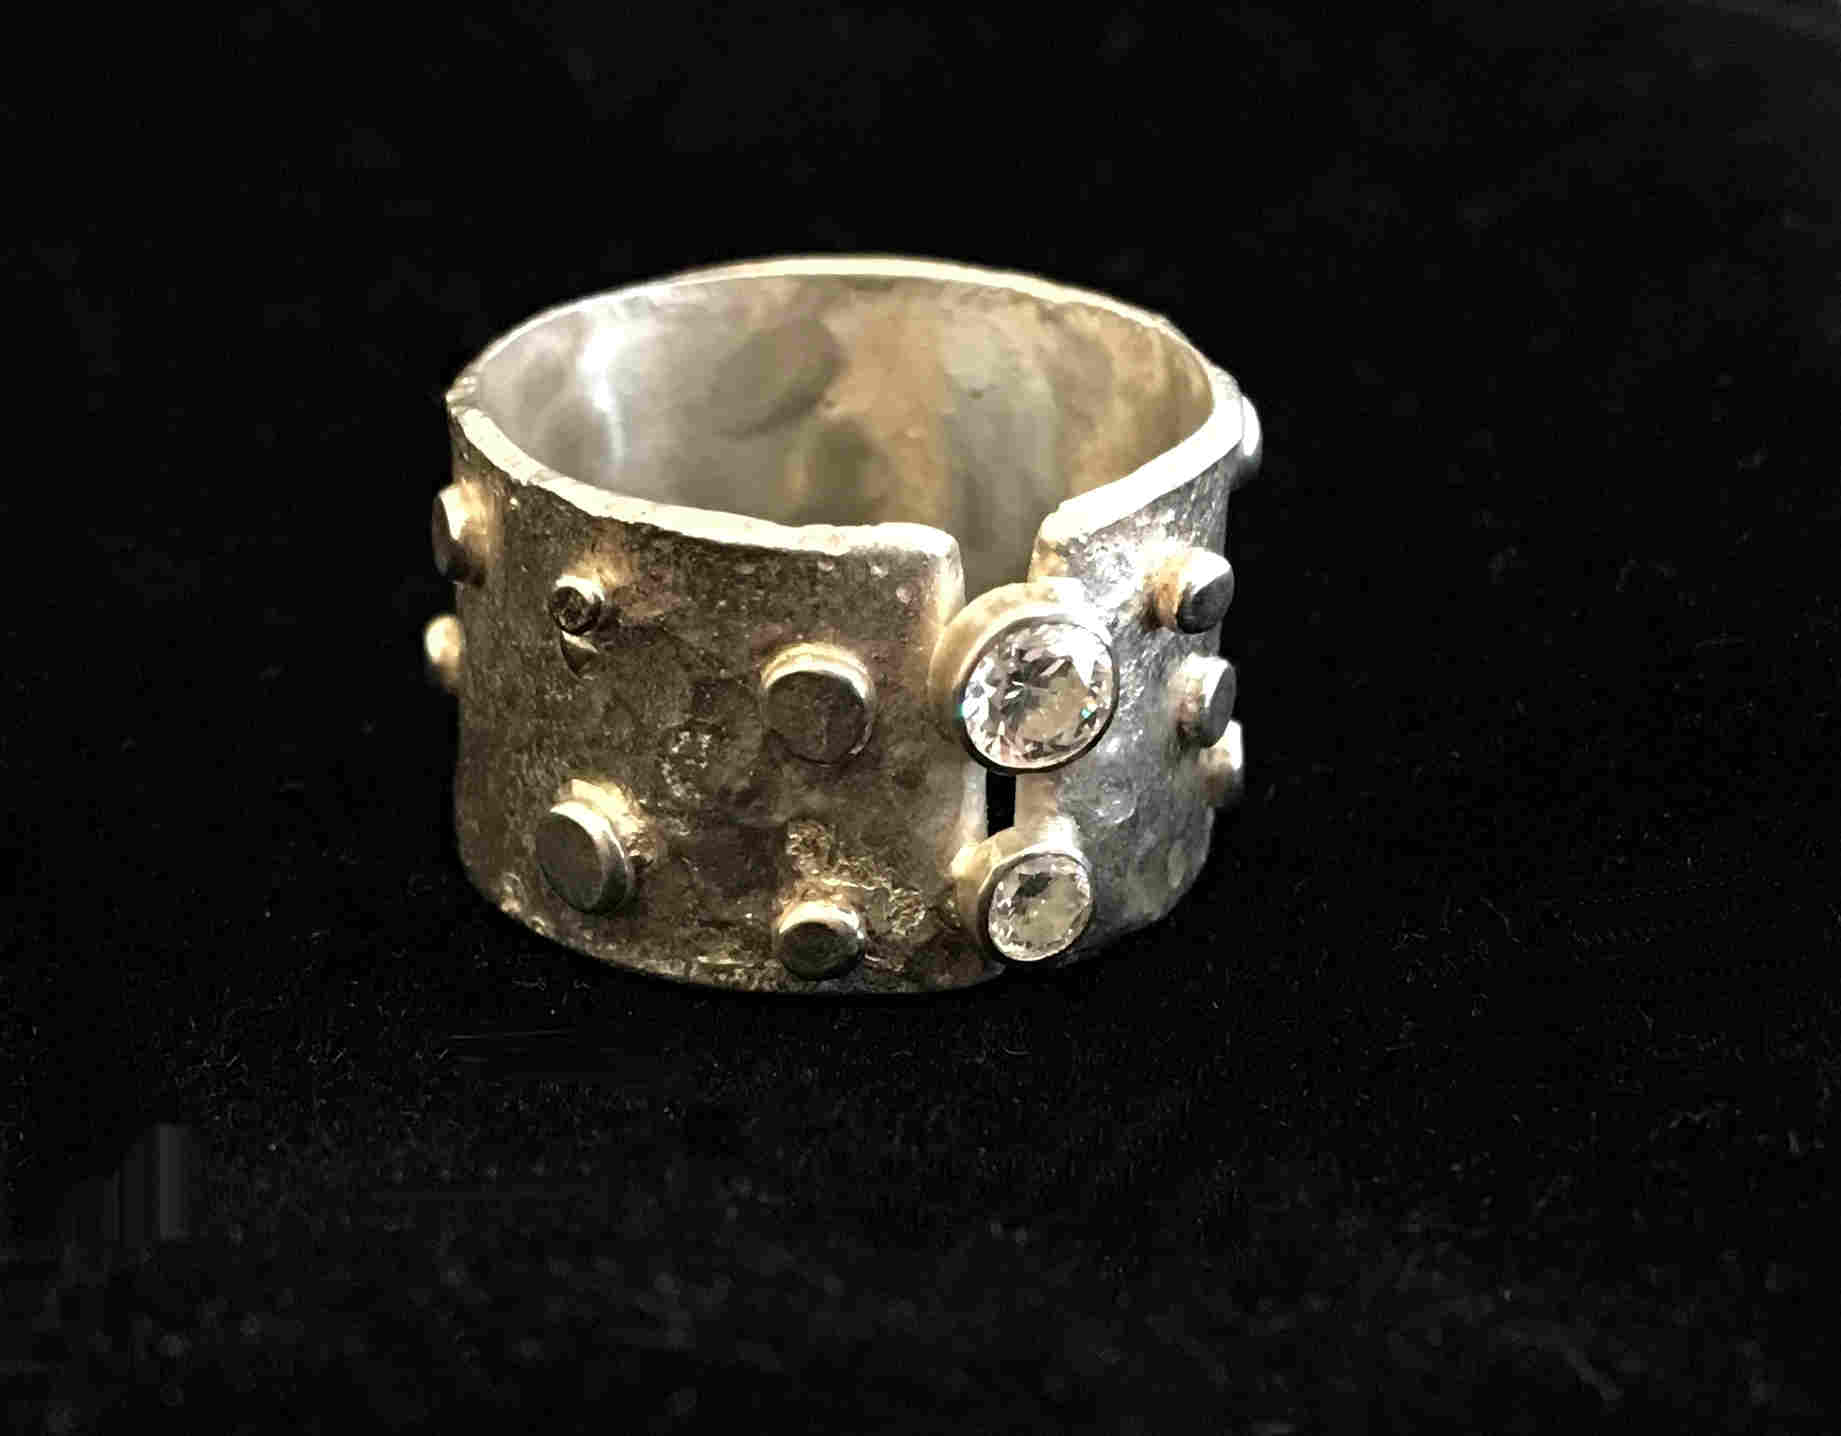 'Sterling Silver Ring with 2 Clear Stones' by artist Carol Docherty